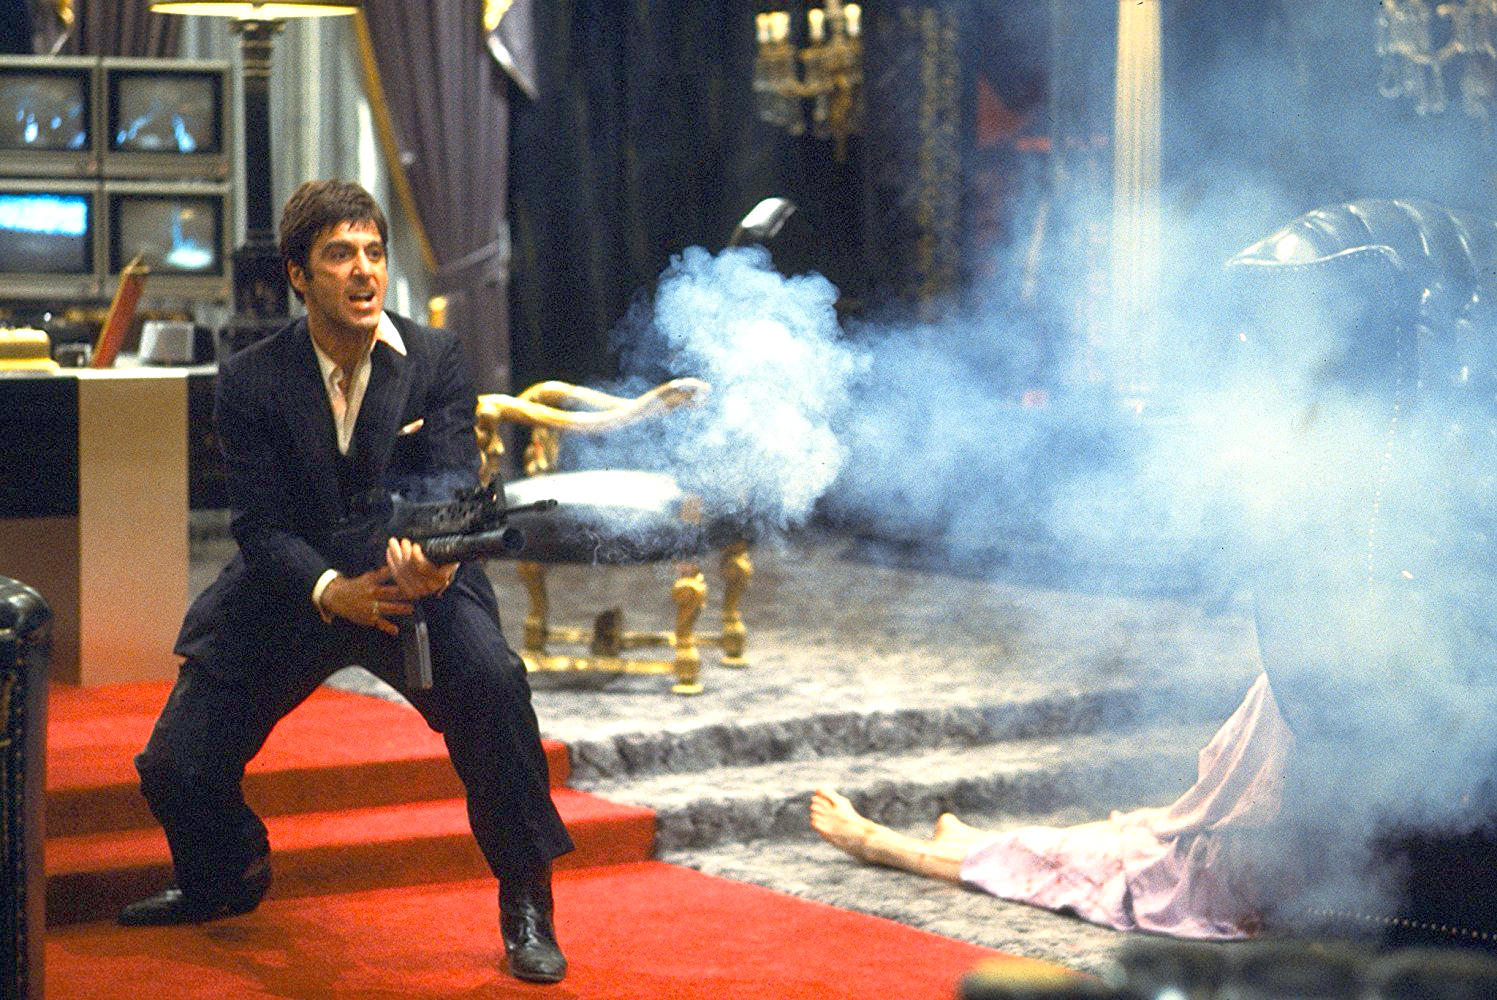 PHOTO: Al Pacino in a scene from "Scarface," 1983.